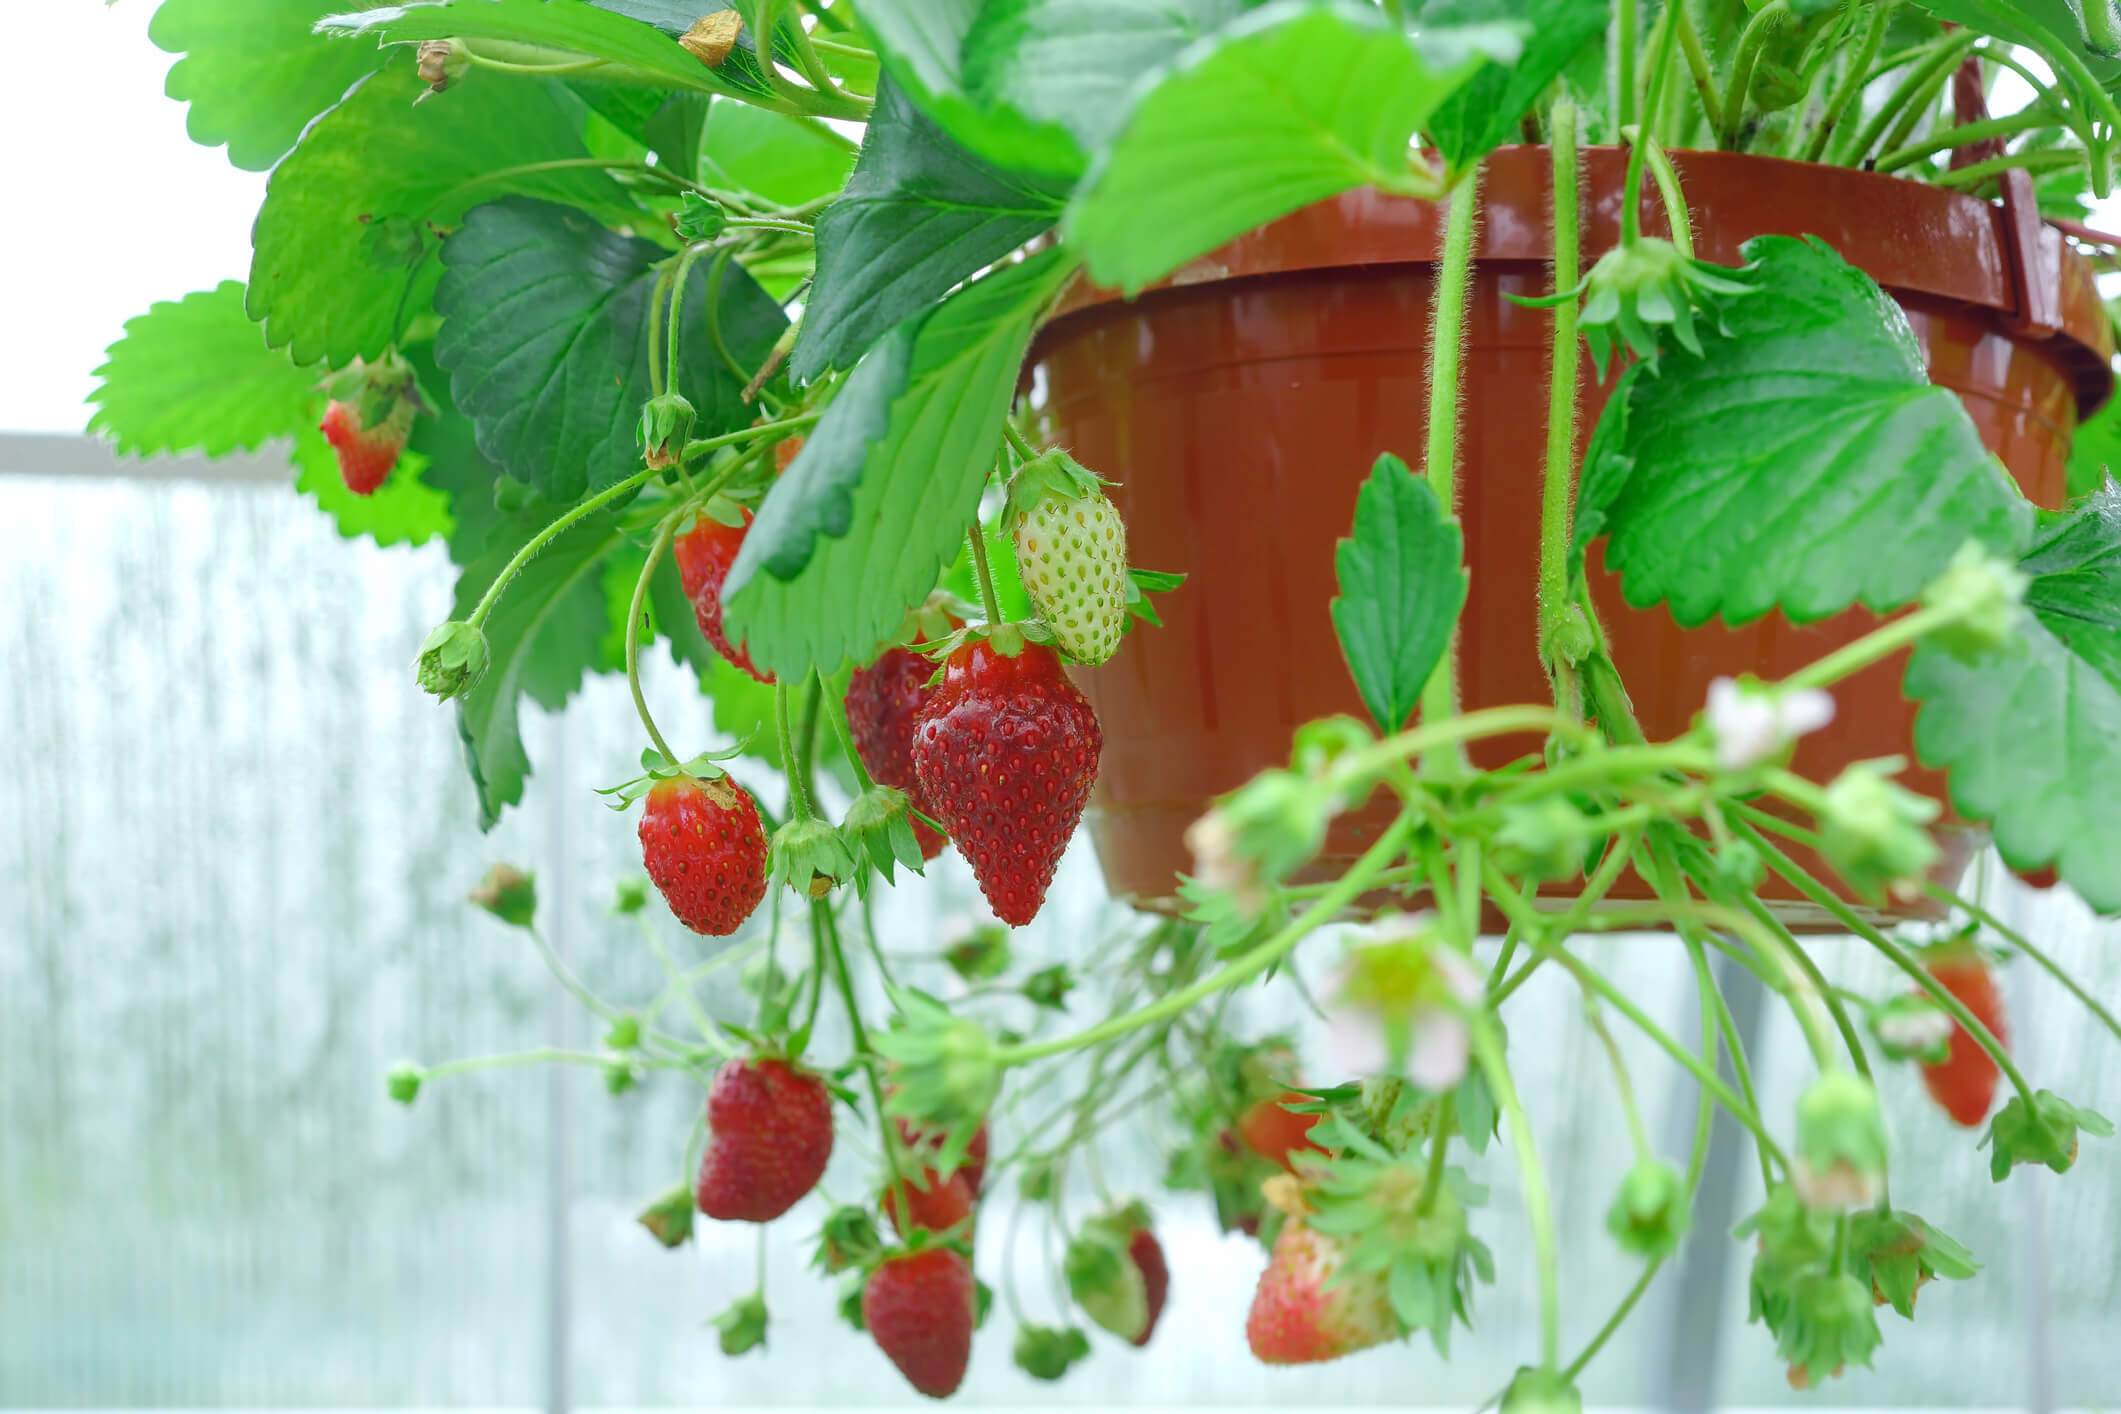 Organic stawberries can be grown from hanging baskets.